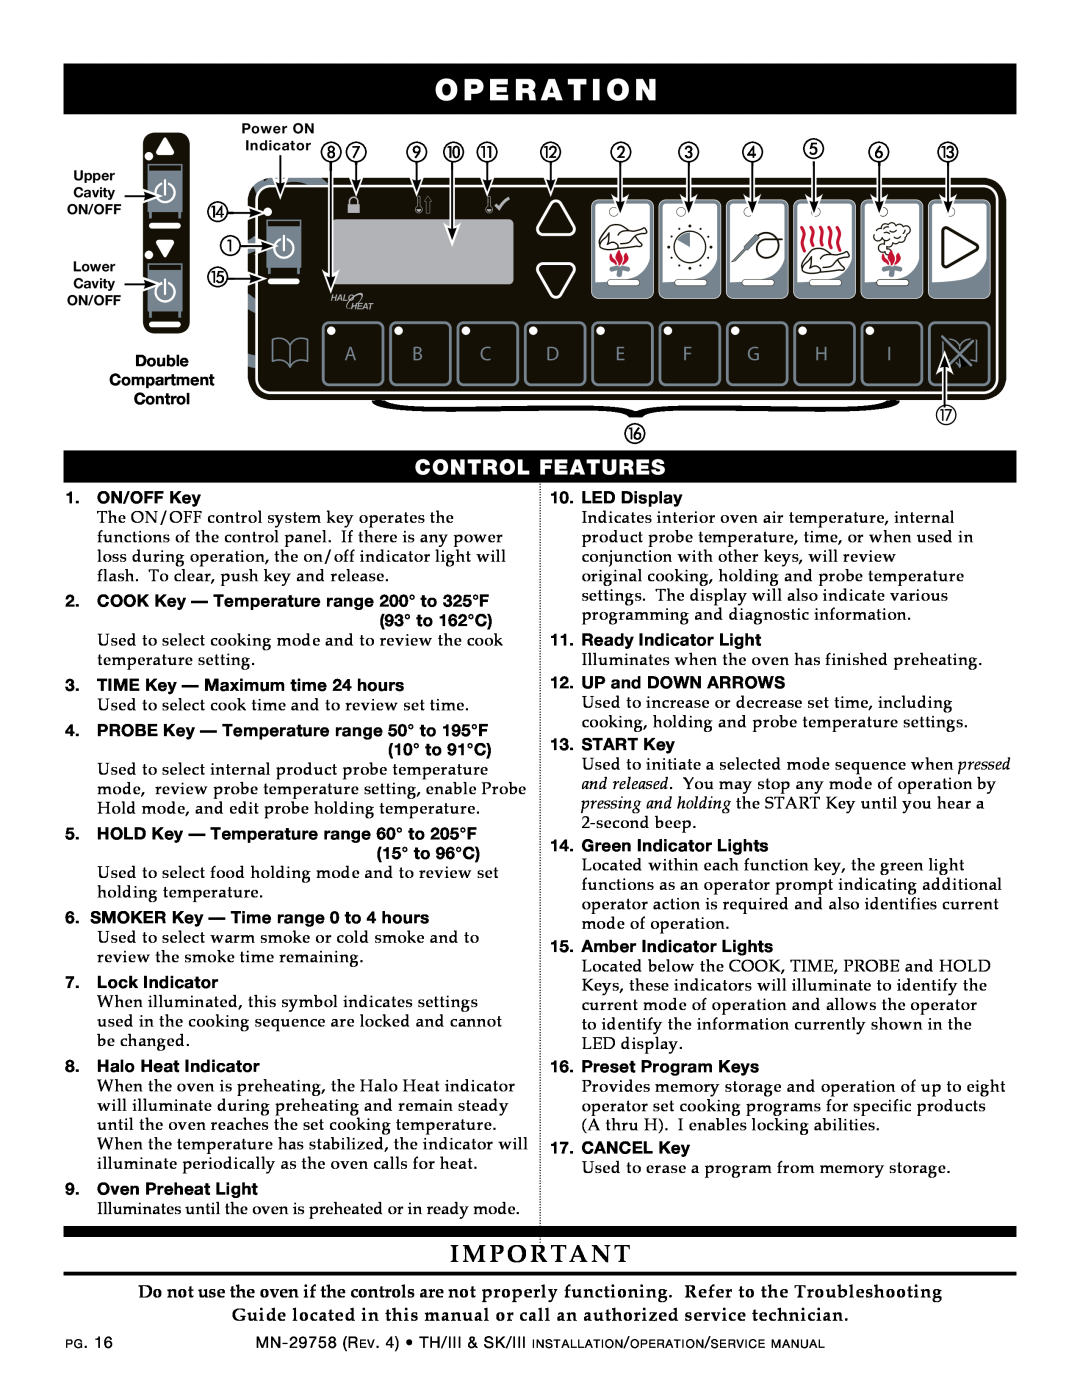 Alto-Shaam 1767-SK/III, 1000-TH/III, 500-TH/III, 750-TH/III, 1200-TH/III, 1200-SK/III manual ope r a t i o n, control features 